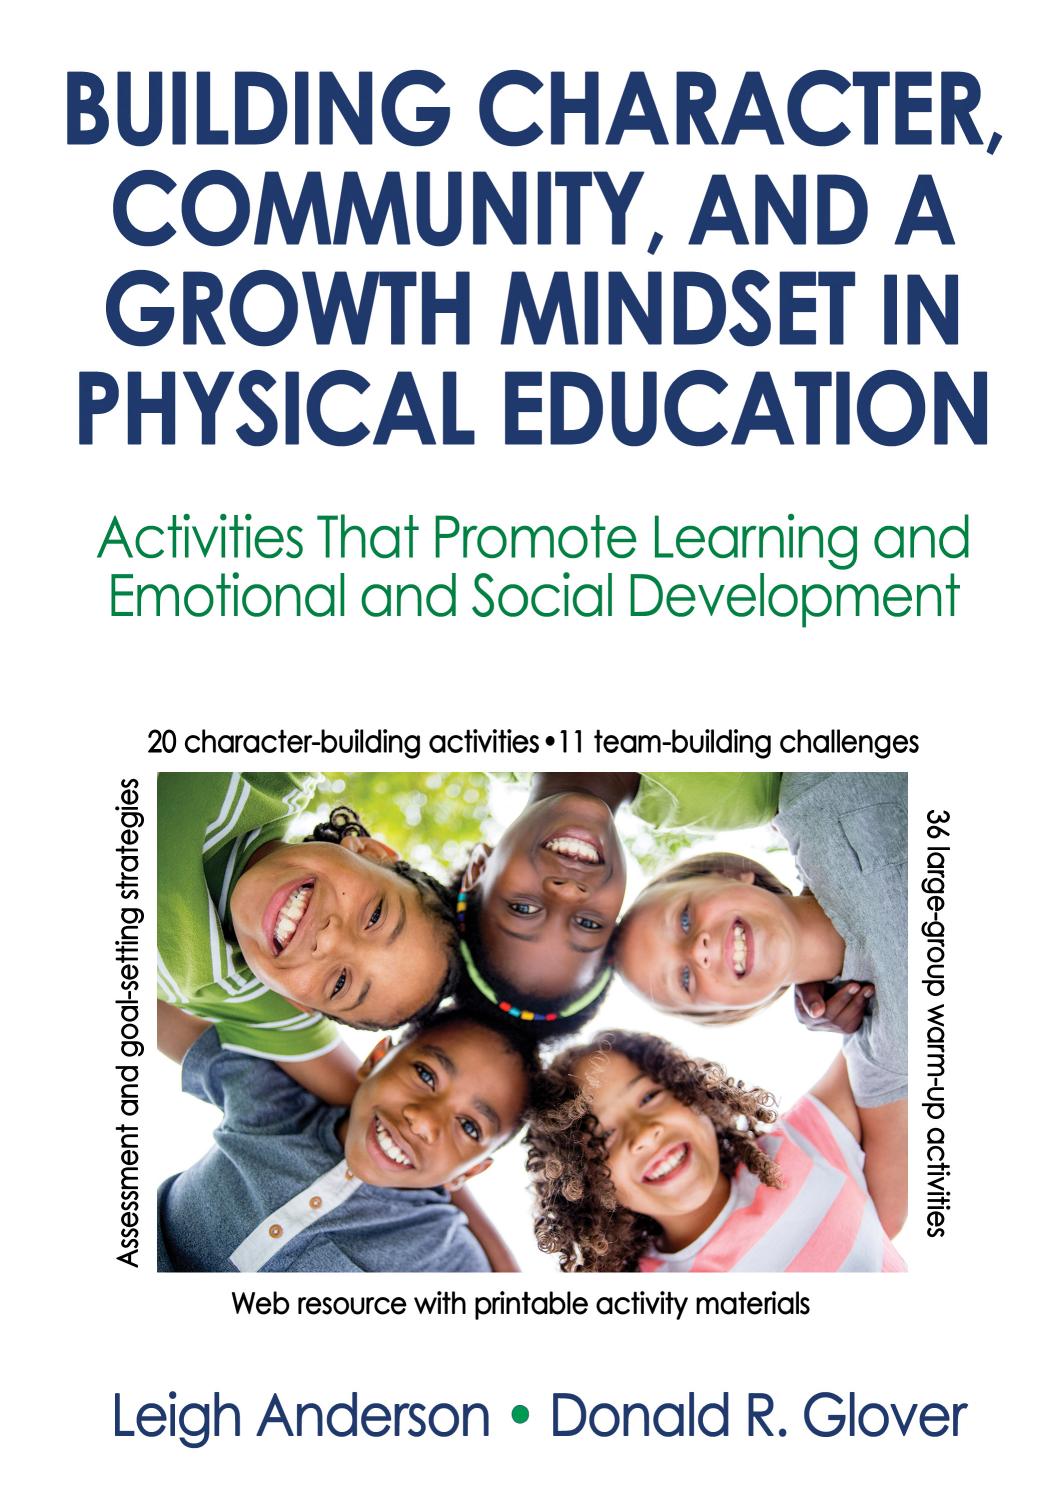 Building Character, Community, and a Growth Mindset in Physical Education